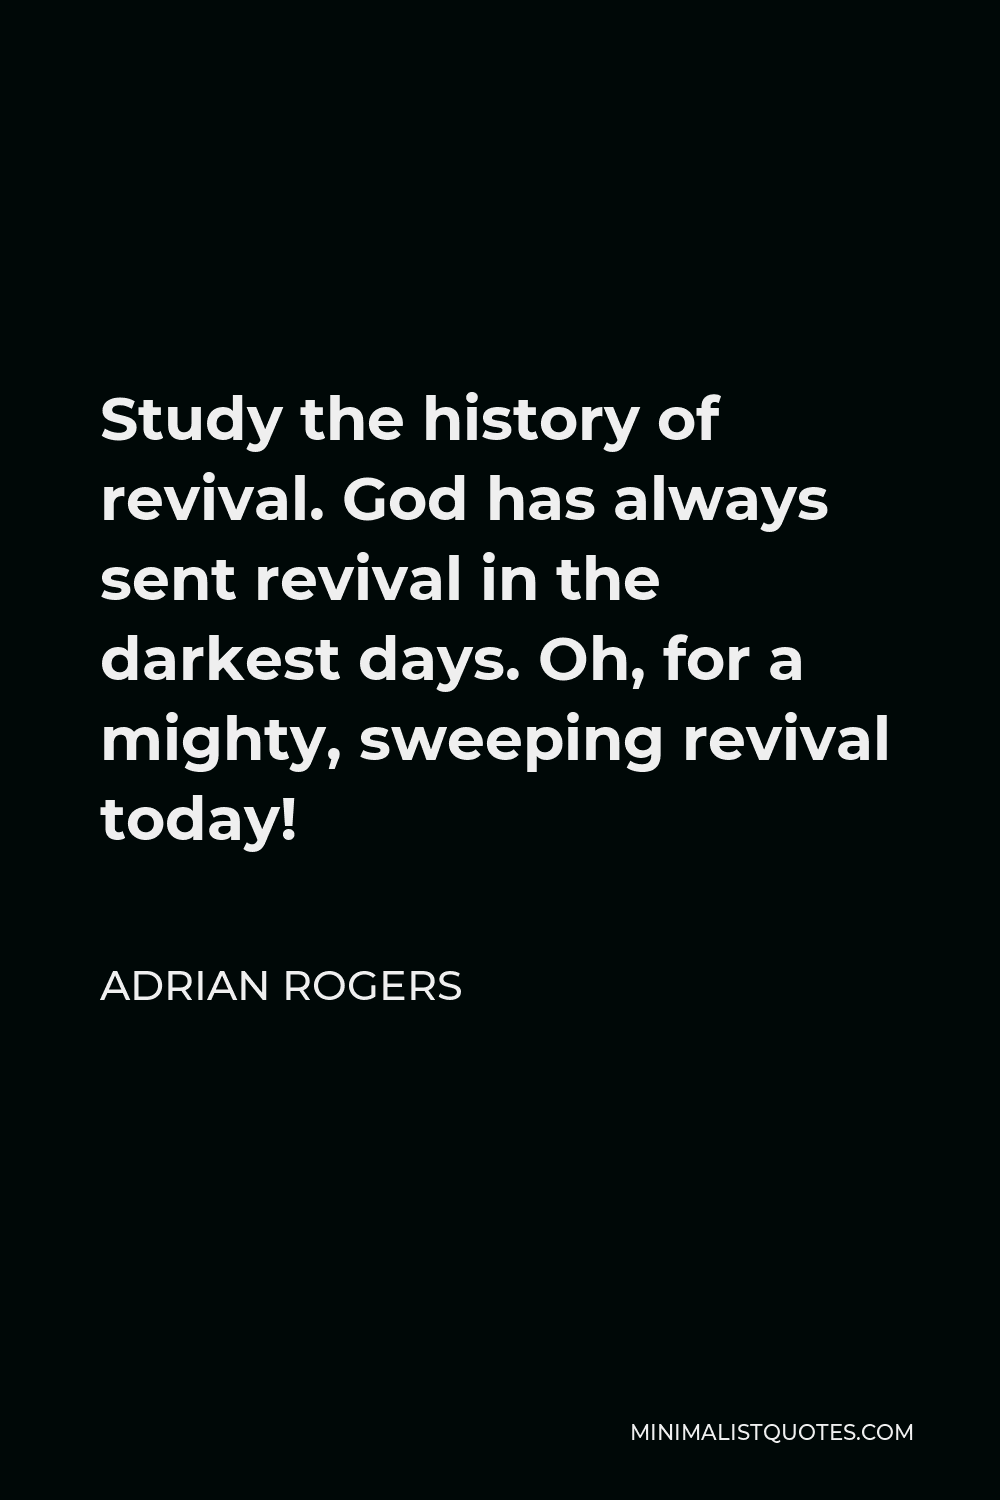 Adrian Rogers Quote - Study the history of revival. God has always sent revival in the darkest days. Oh, for a mighty, sweeping revival today!